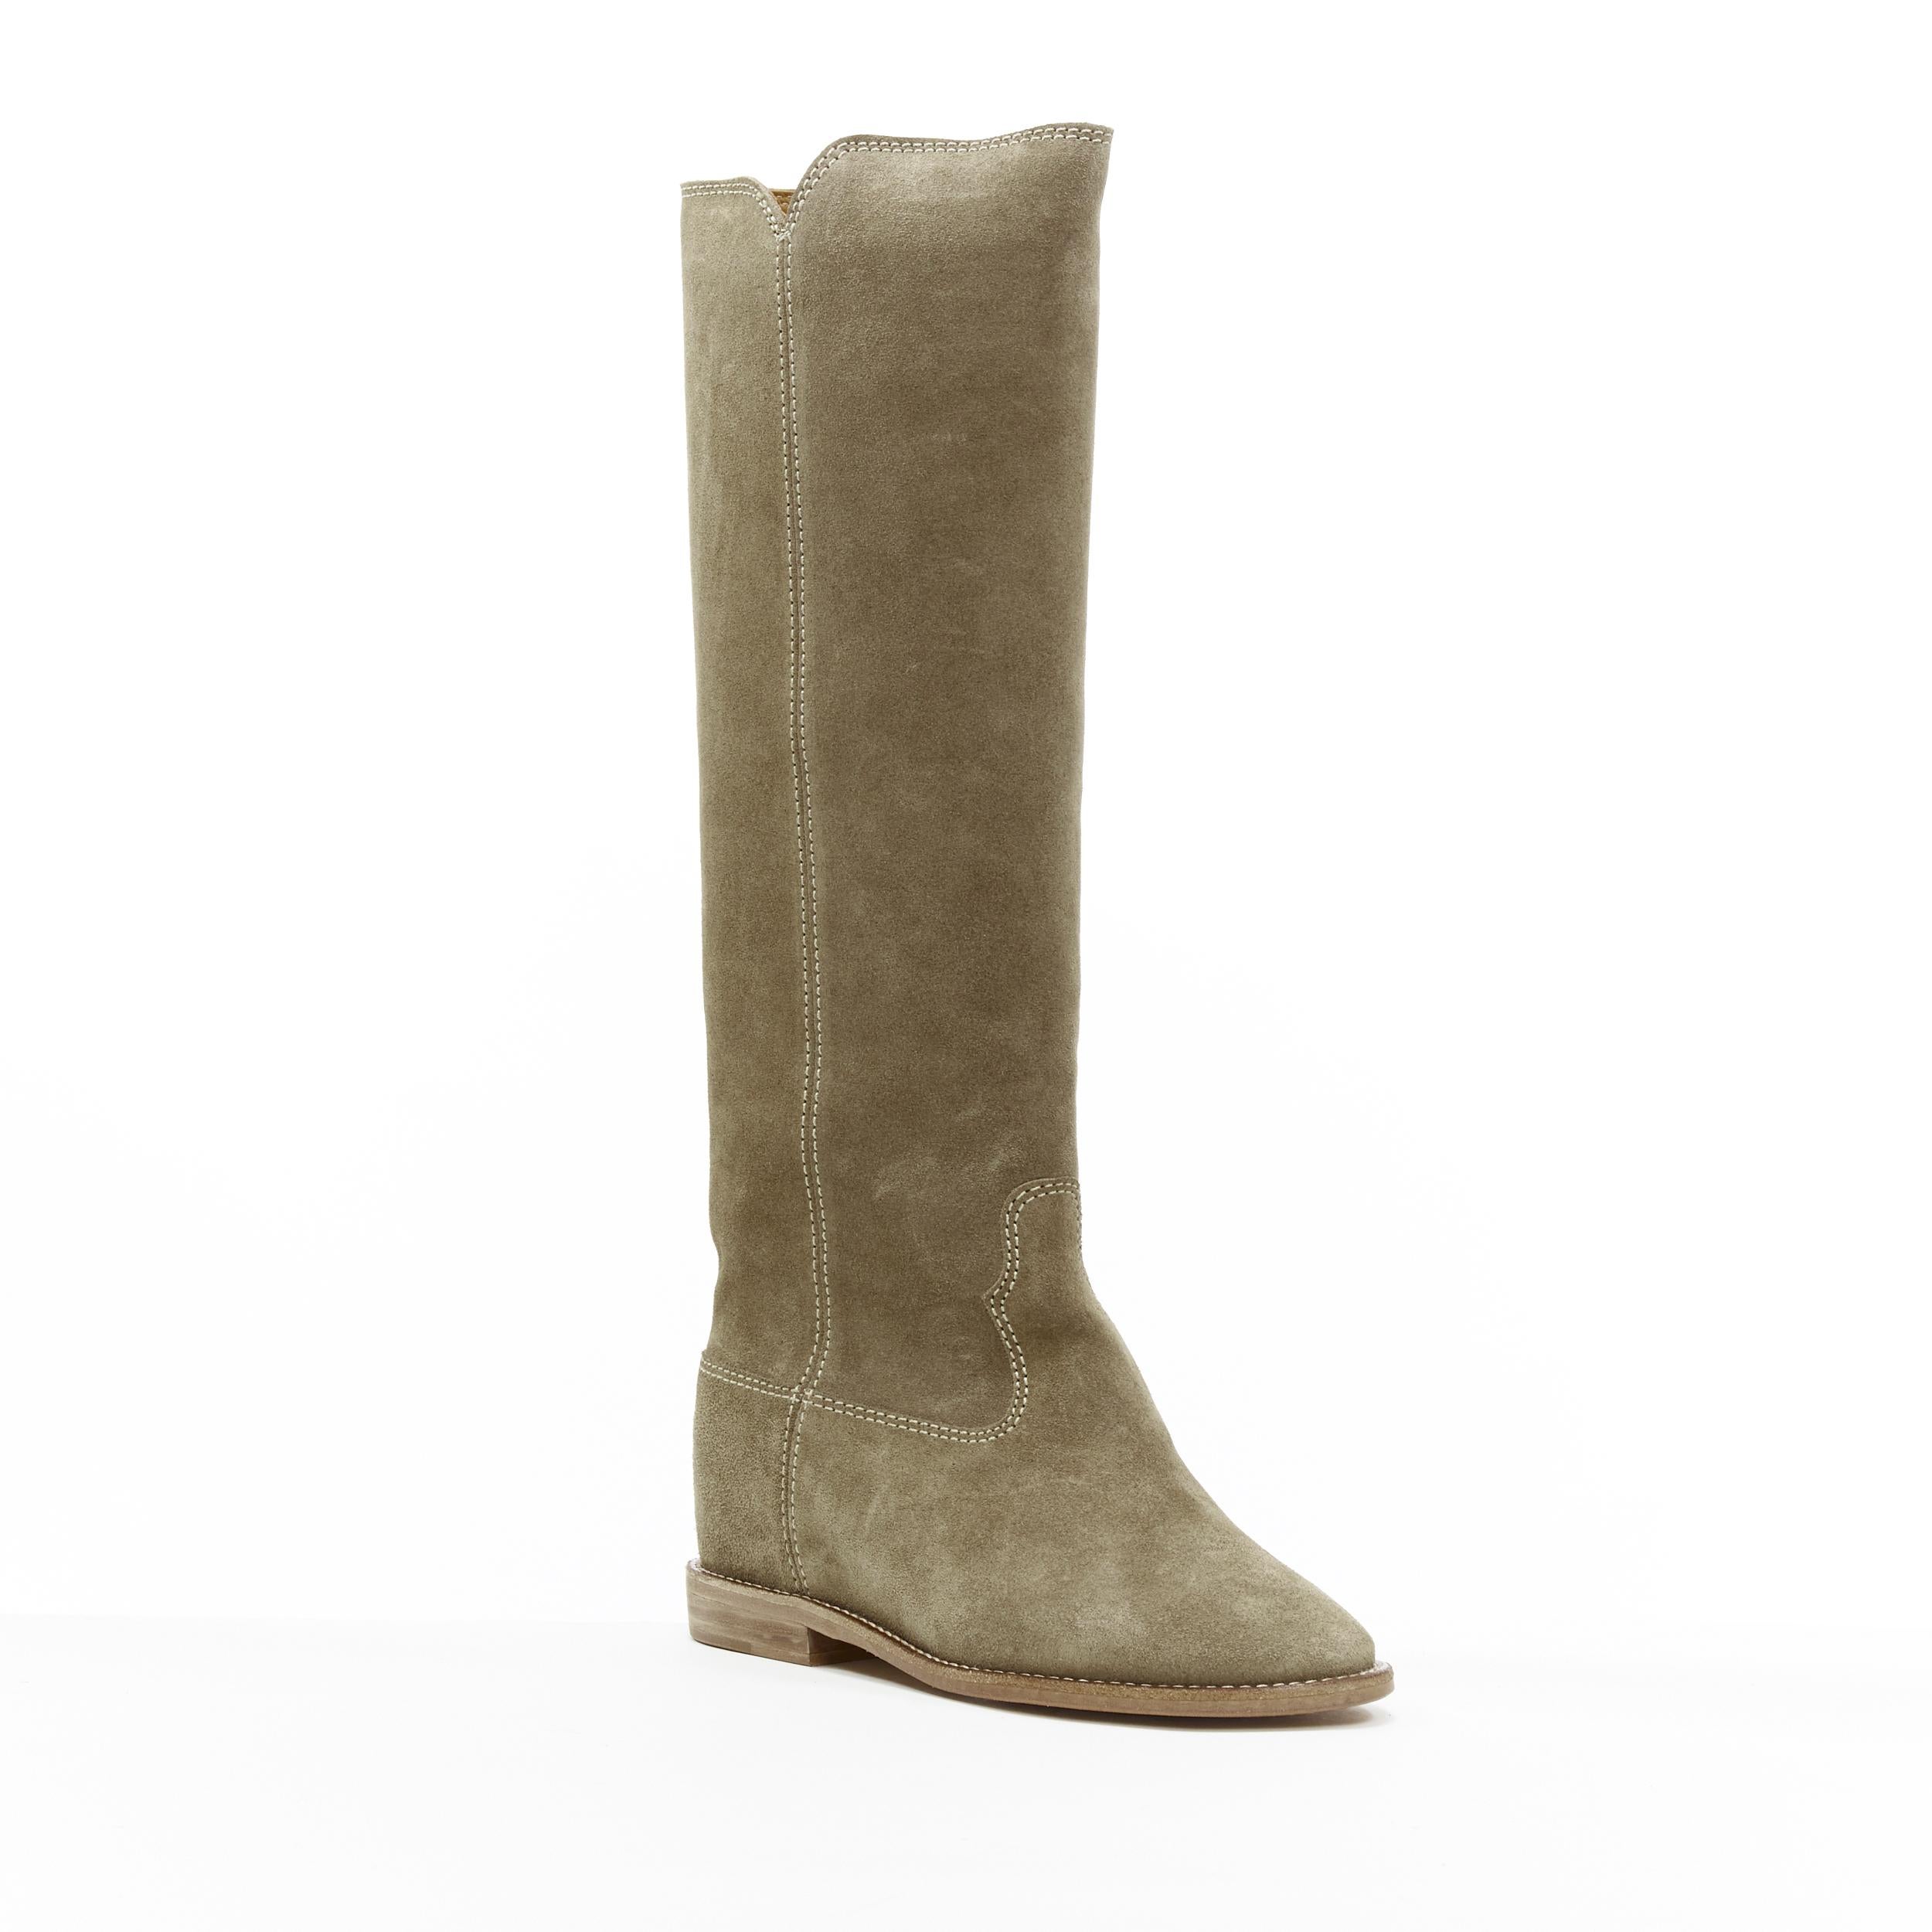 new ISABEL MARANT Cleave Taupe suede concealed wedge knee high western boot EU35
Brand: Isabel Marant Etoile
Designer: Isabel Marant
Model Name / Style: Cleave
Material: Suede
Color: Beige; Taupe Olive
Pattern: Solid
Closure: Pull on
Lining